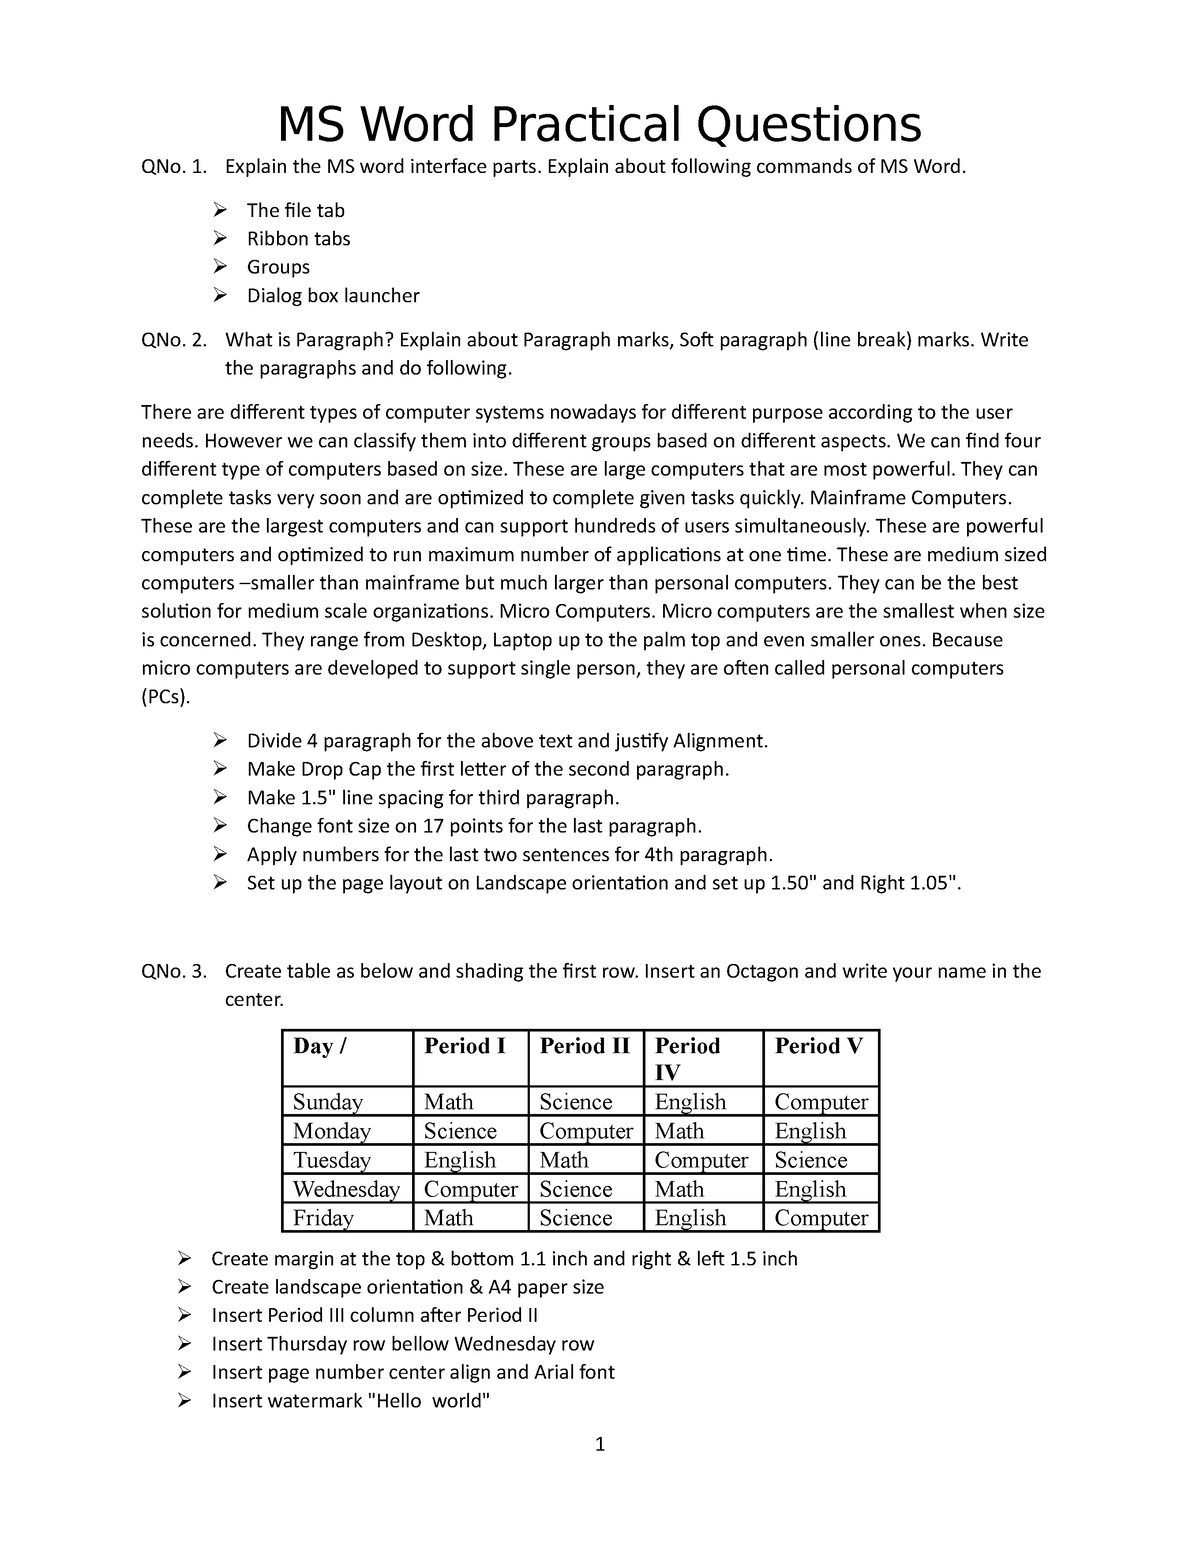 ms word practical assignment for students